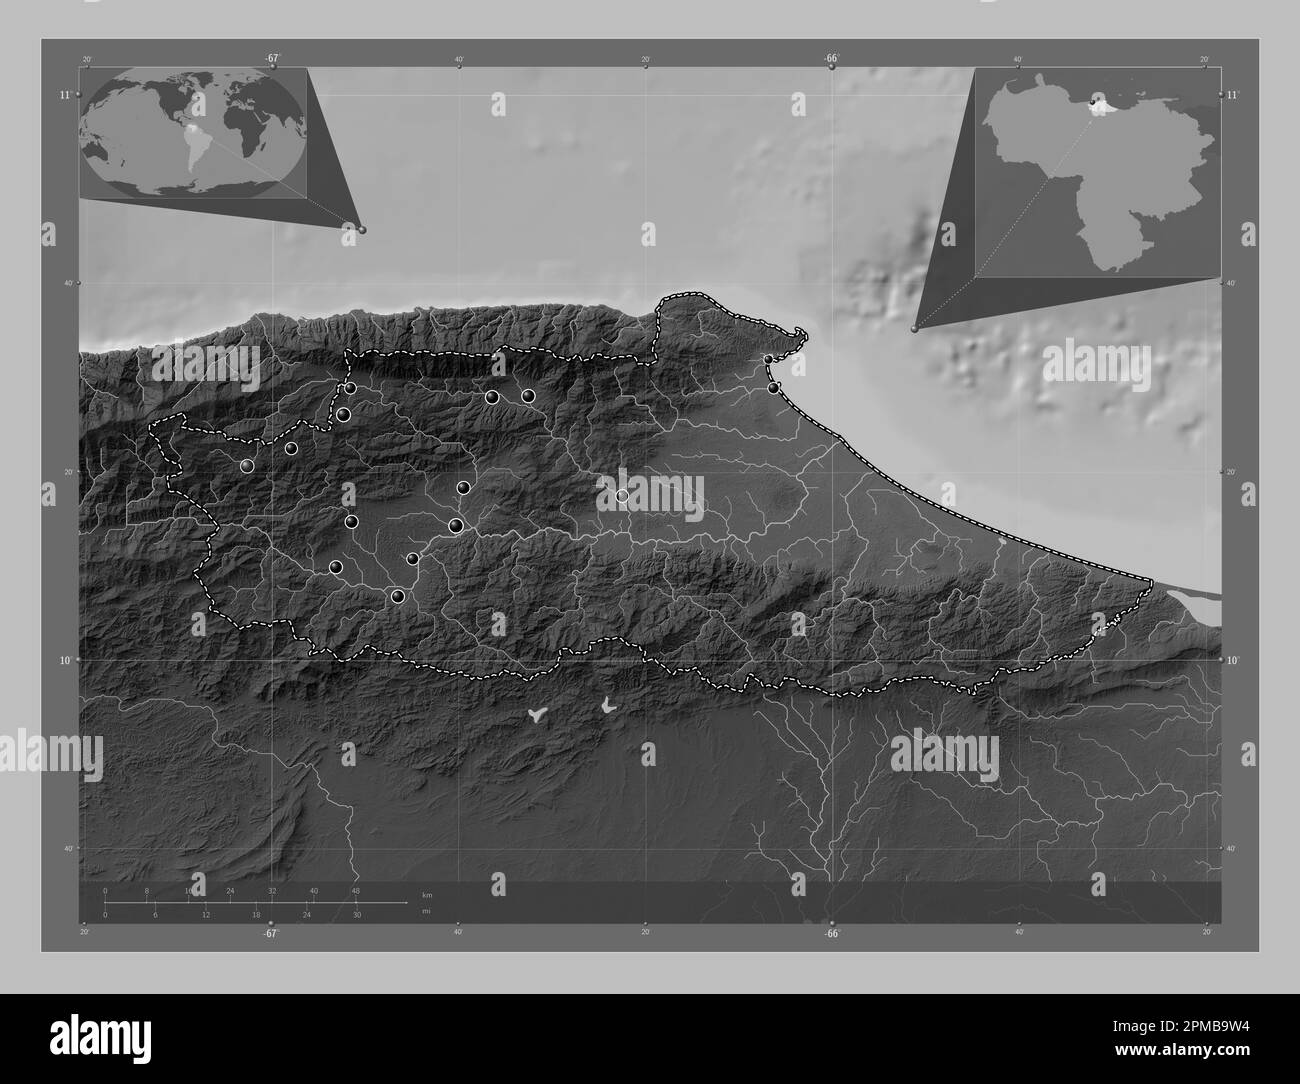 Miranda, state of Venezuela. Grayscale elevation map with lakes and rivers. Locations of major cities of the region. Corner auxiliary location maps Stock Photo